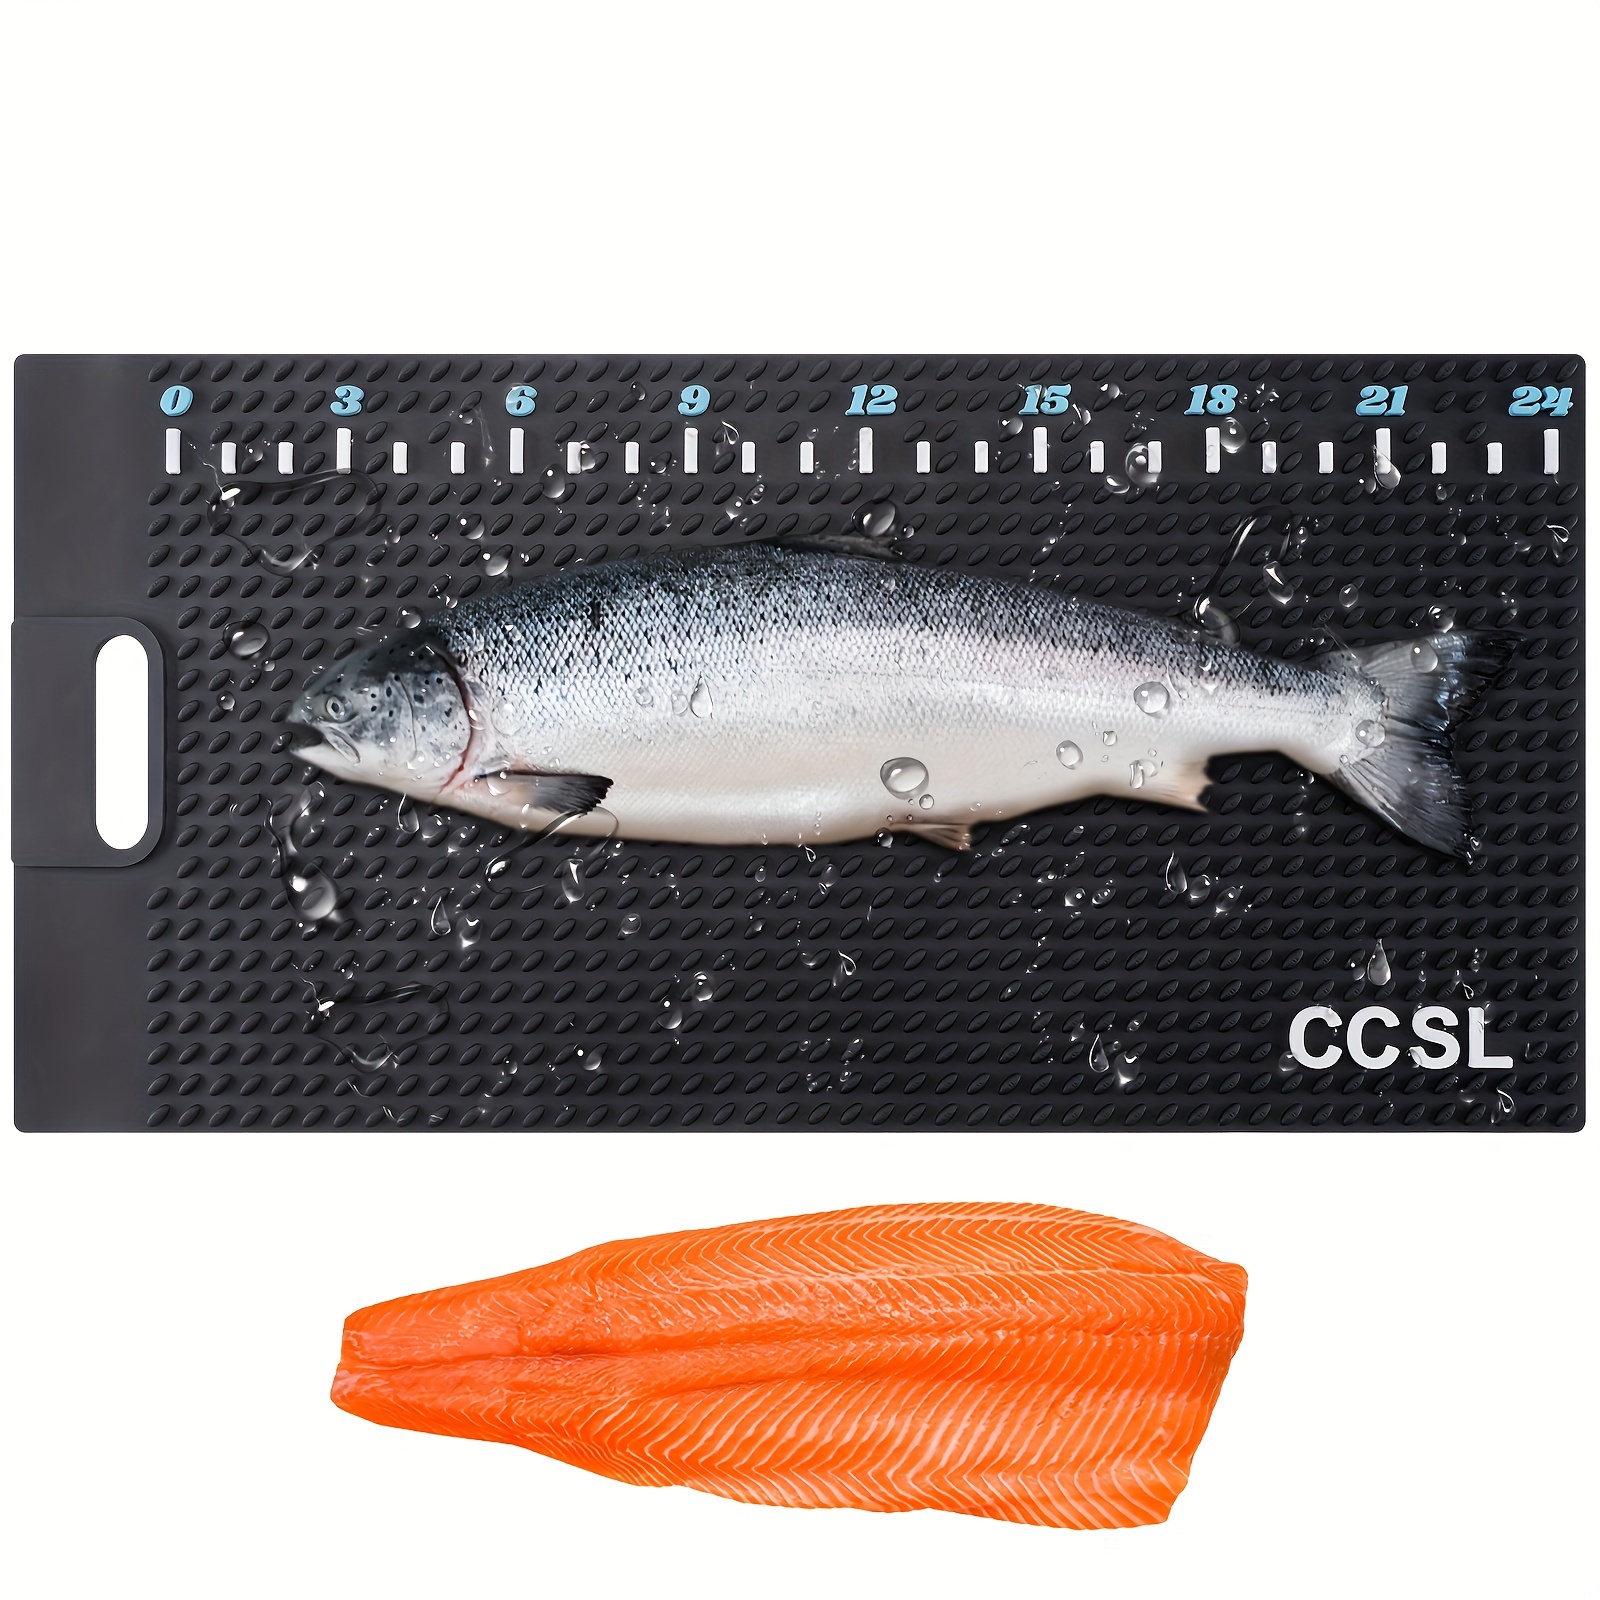  Fish Fillet Mat with Fish Cutting Board, Extra Large